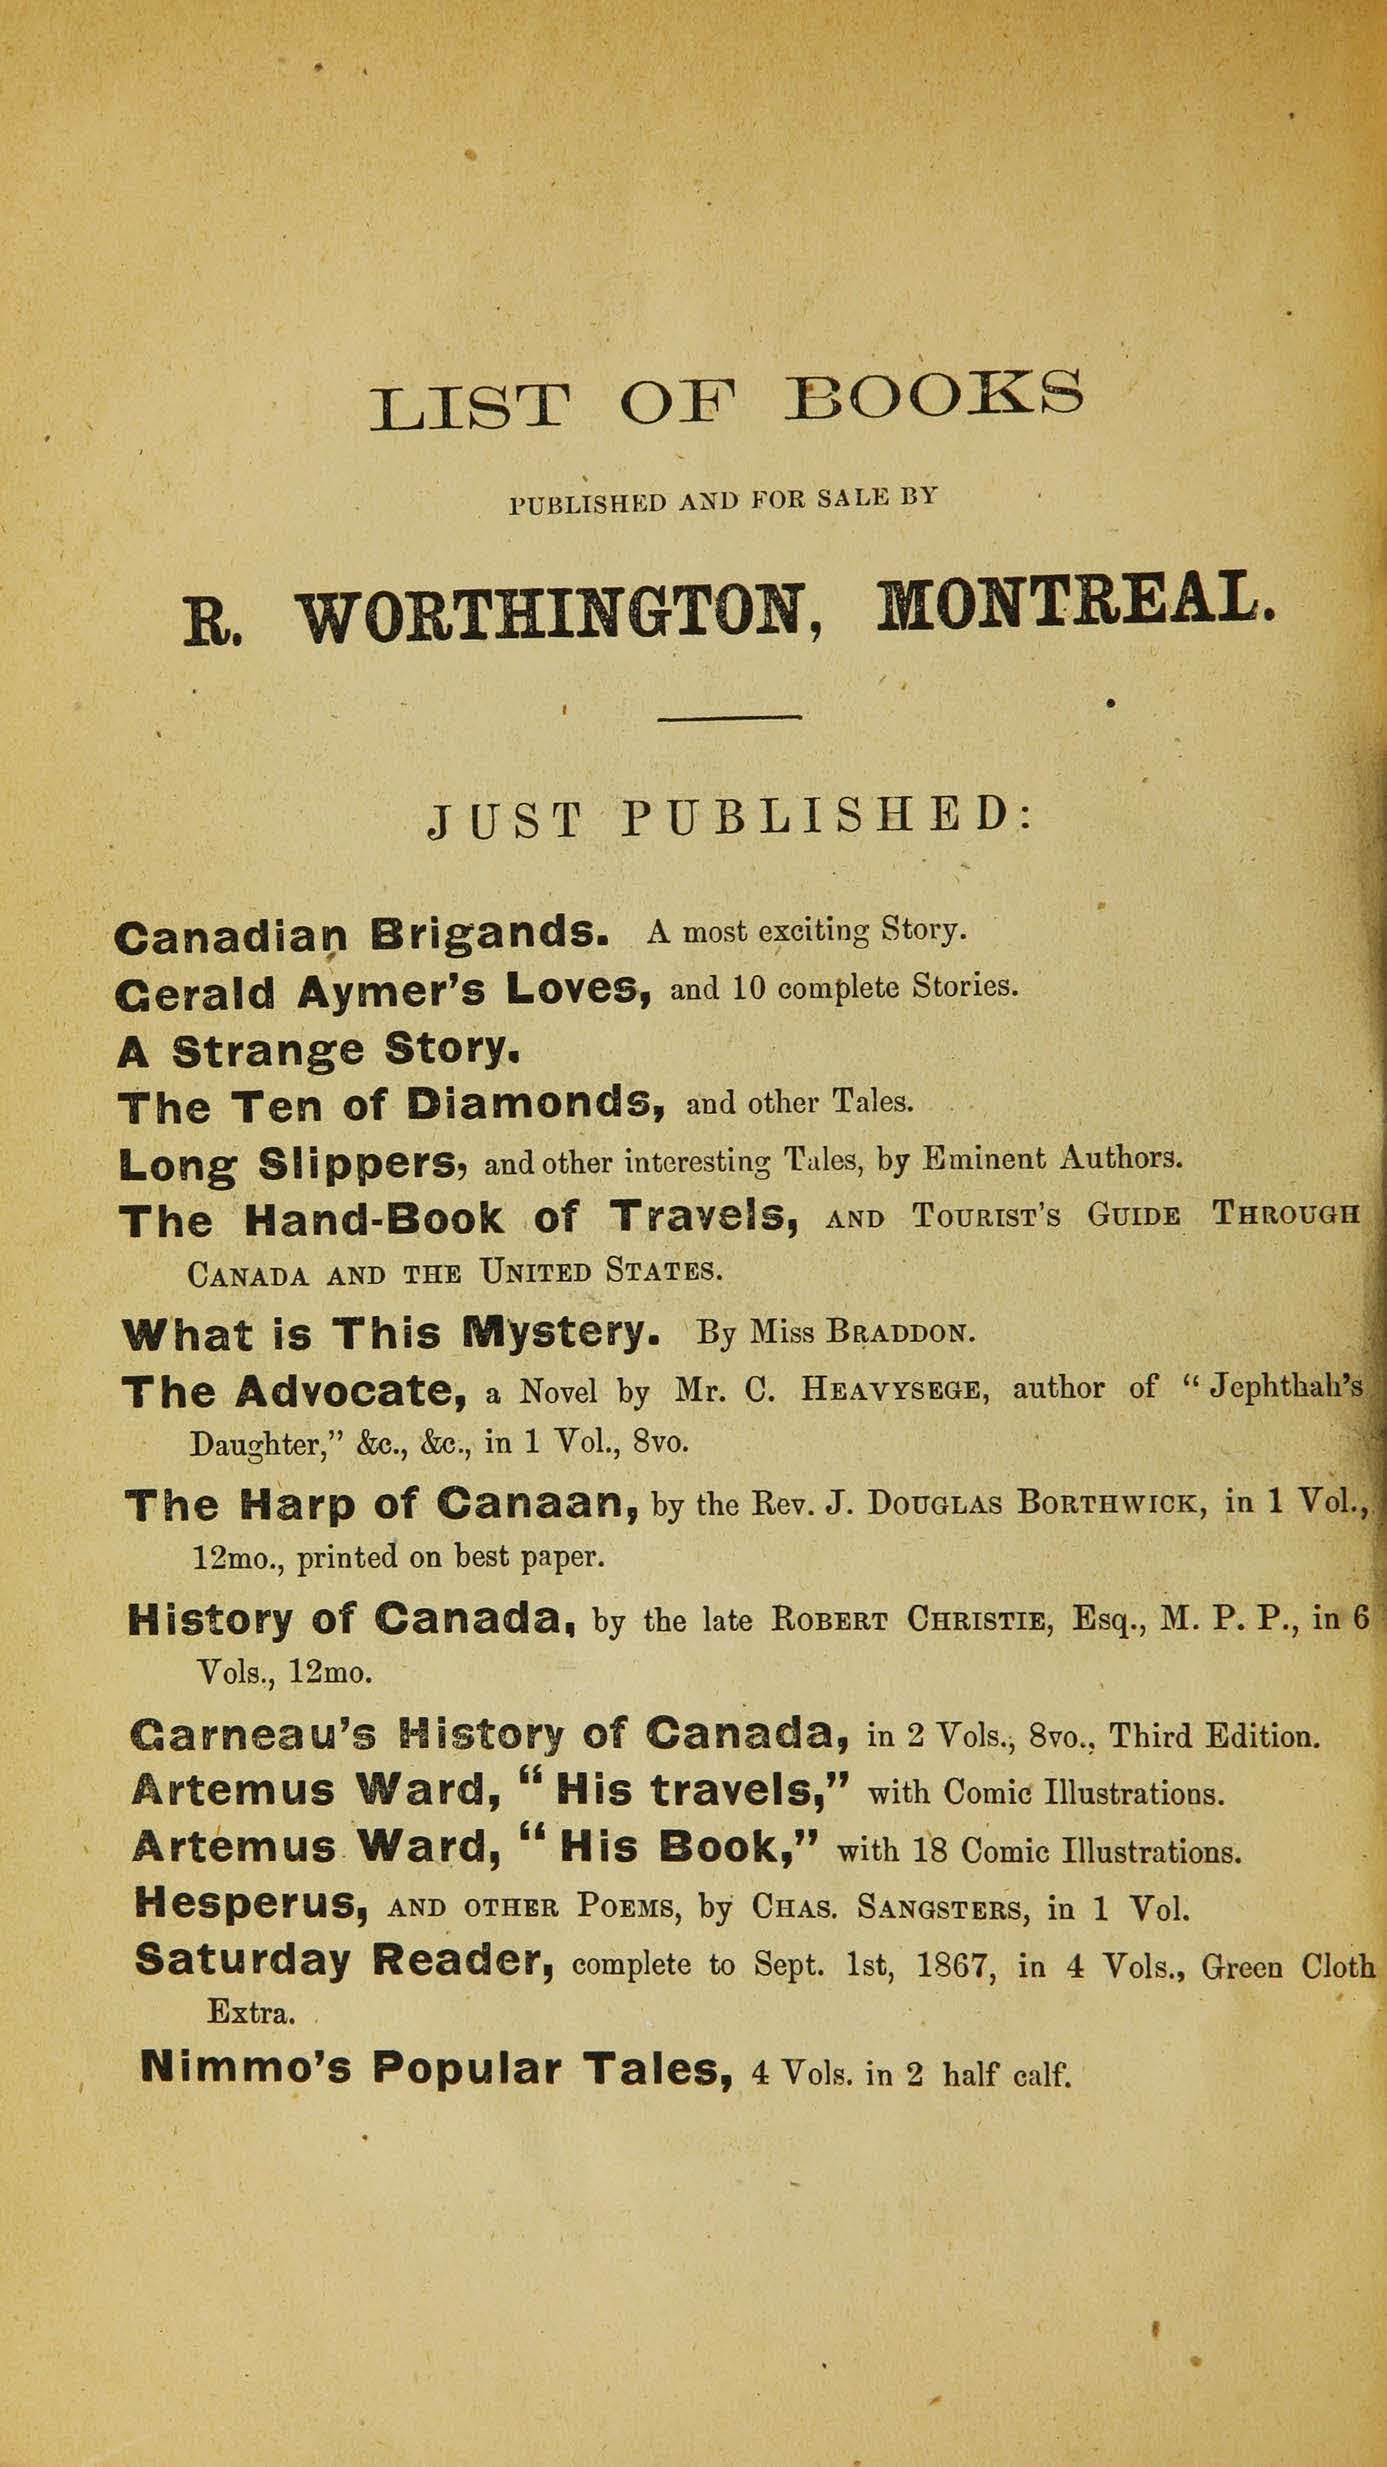 R. Worthington book list on page 12 of The Canadian brigands: An intensely exciting story of crime in Quebec thirty years ago. (1867).